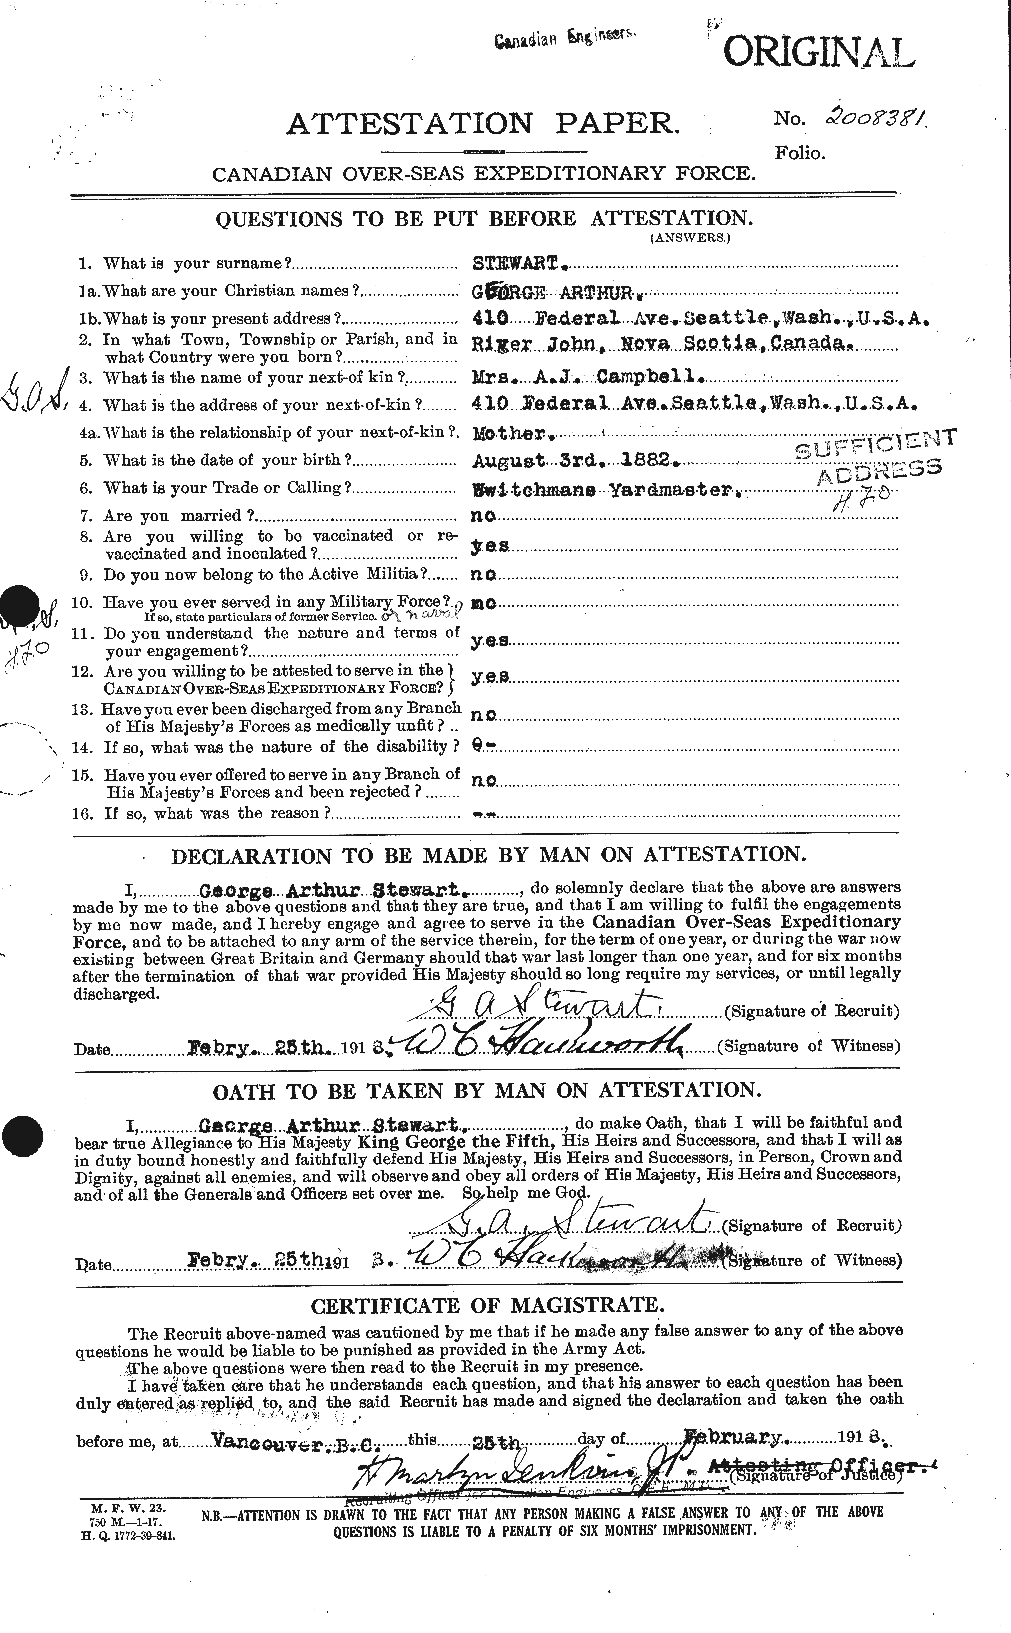 Personnel Records of the First World War - CEF 117523a